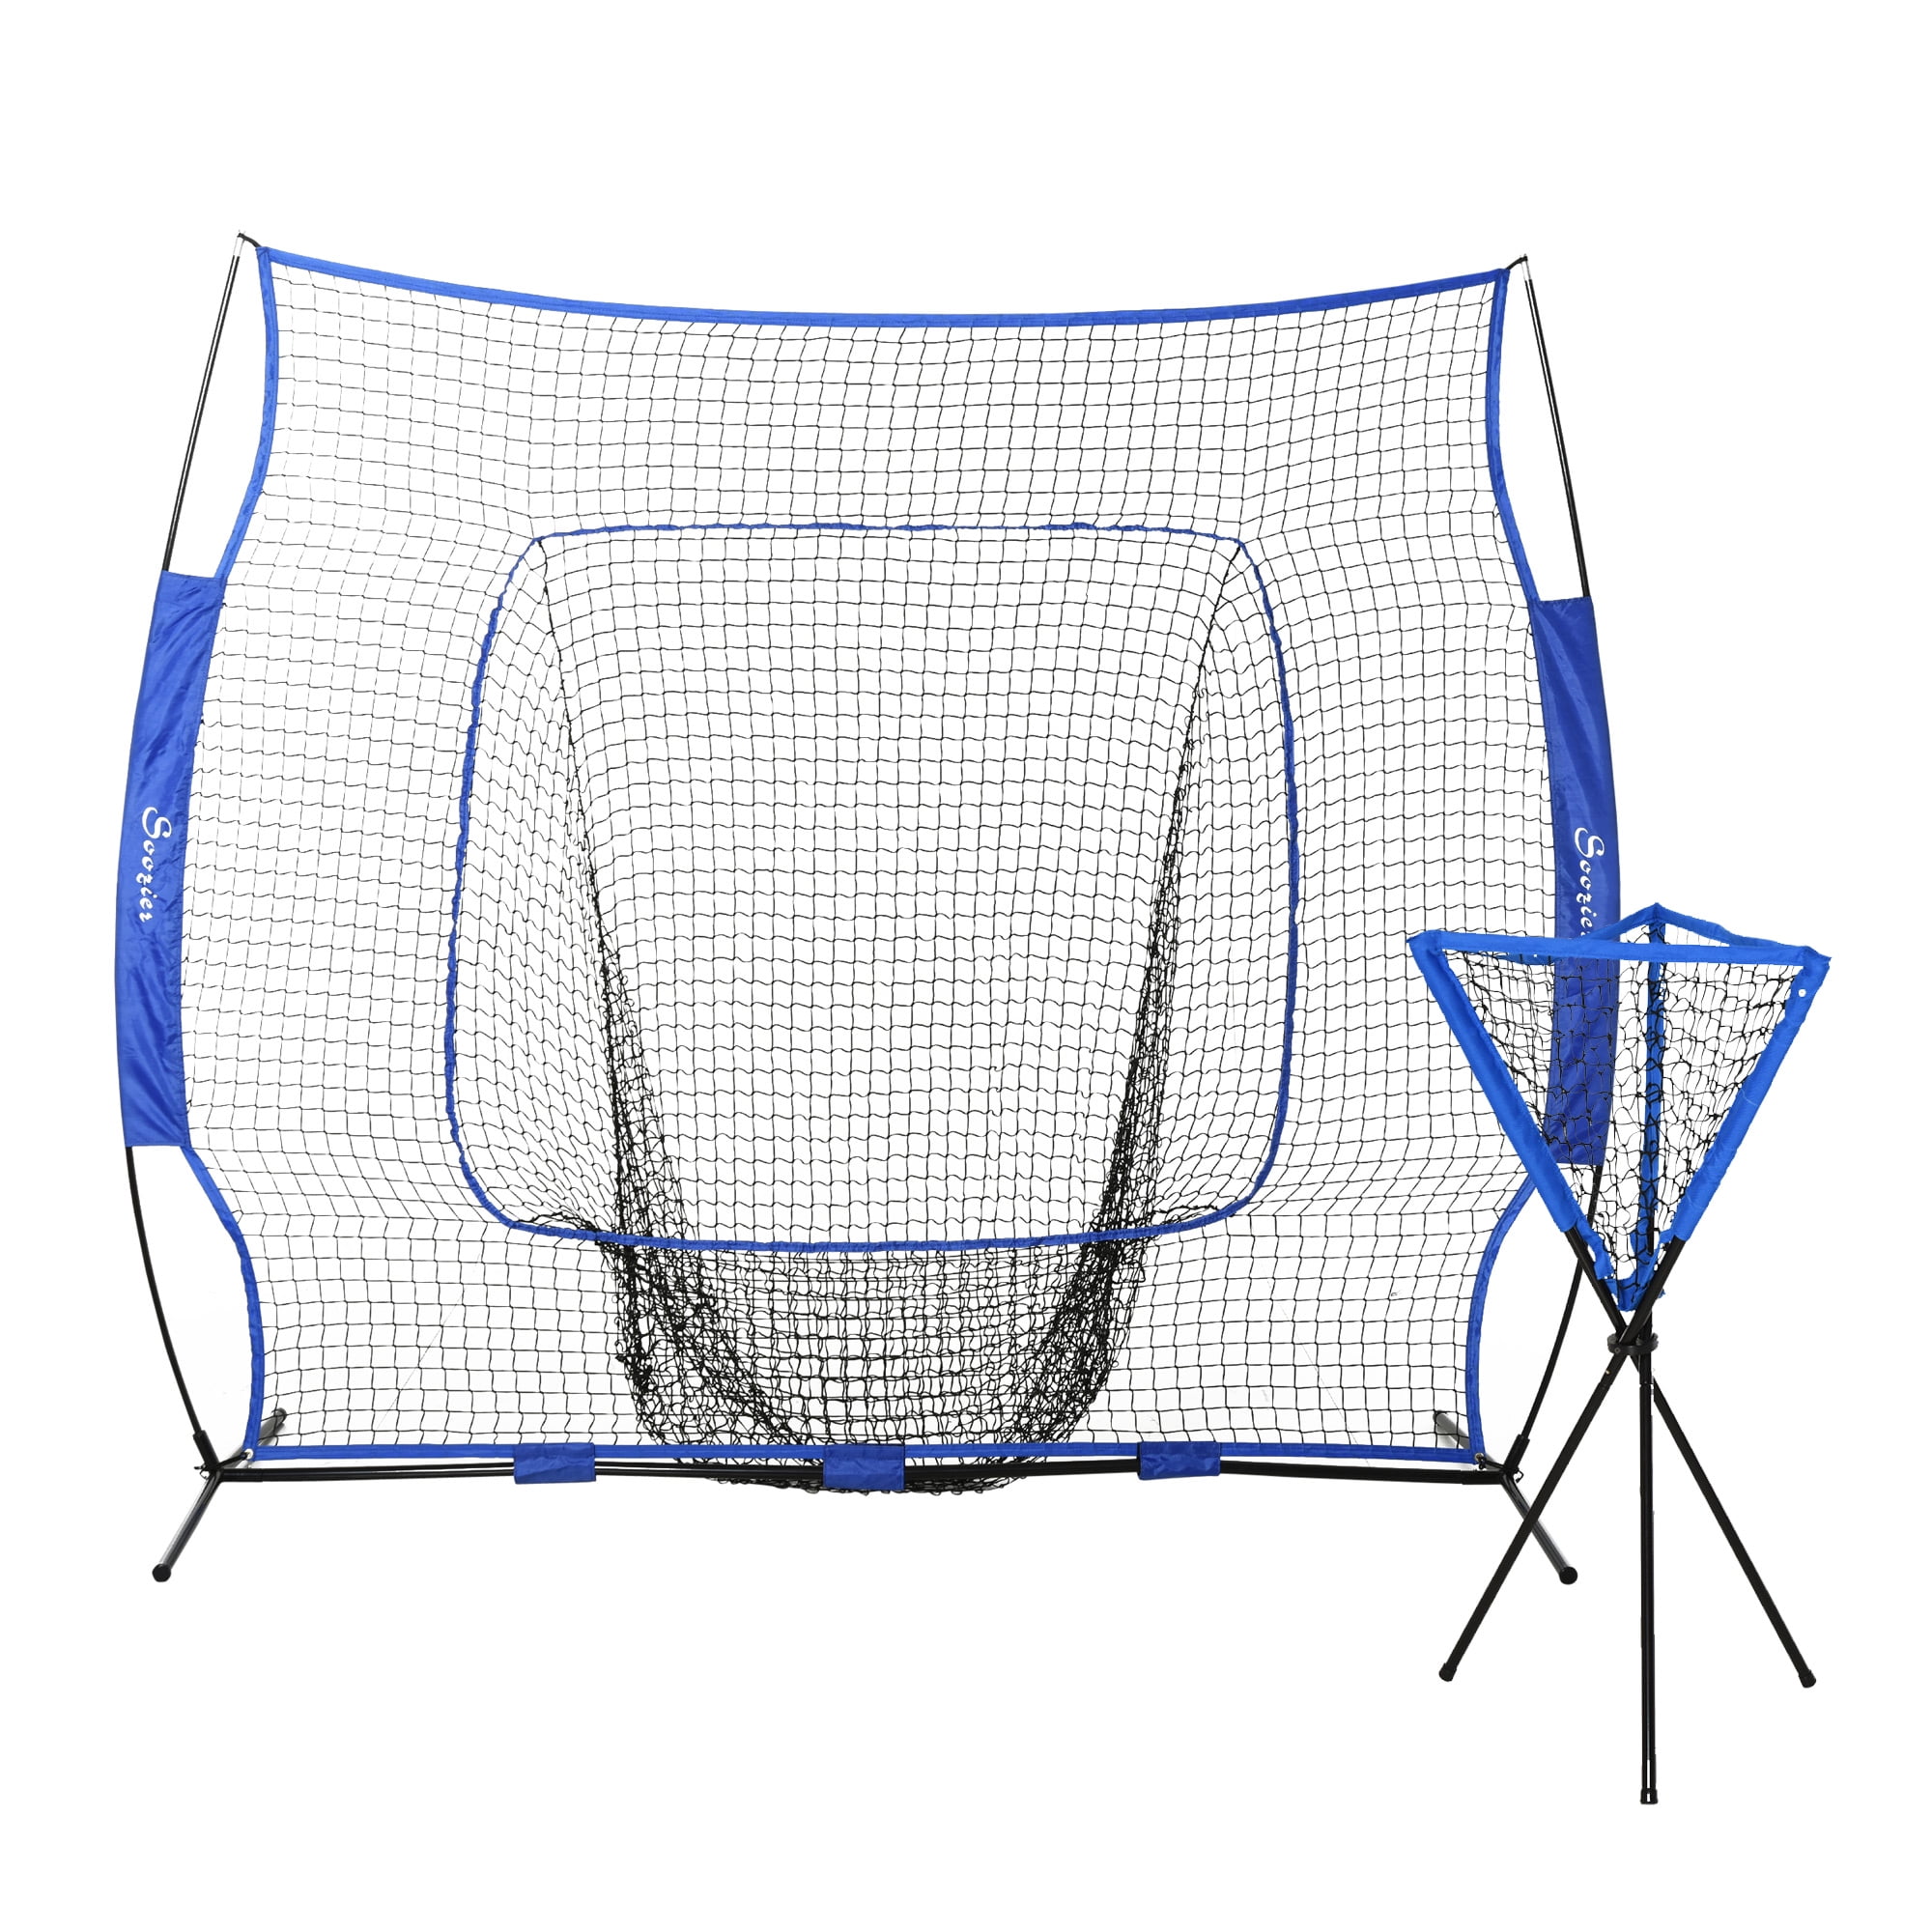 Soozier 7.5 Ft. x 7 Ft. Baseball Practice Net Set with Catcher Net and Tee Stand, Pitching, Fielding, Practice Hitting, Batting, Backstop, Training Aid, Portable Training Equipment